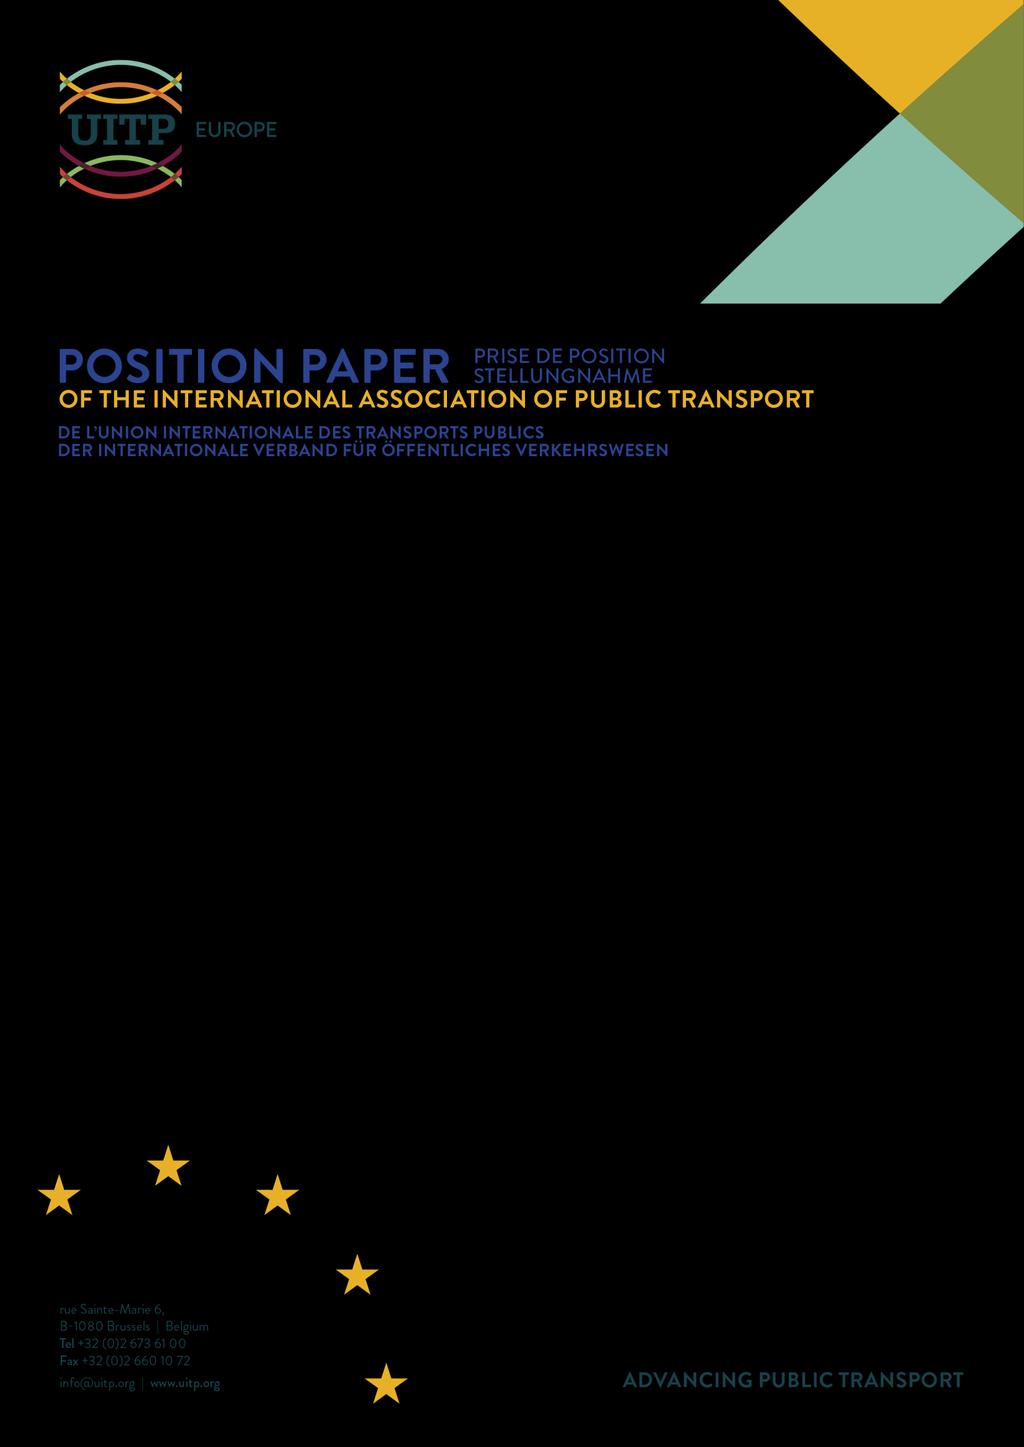 APRIL 2018 FOR A SUSTAINABLE AND COST-EFFICIENT CLEAN BUS DEPLOYMENT : UITP POSITION ON THE REVISION OF DIRECTIVE 2009/33/EC UITP (International Association of Public Transport) is a passionate